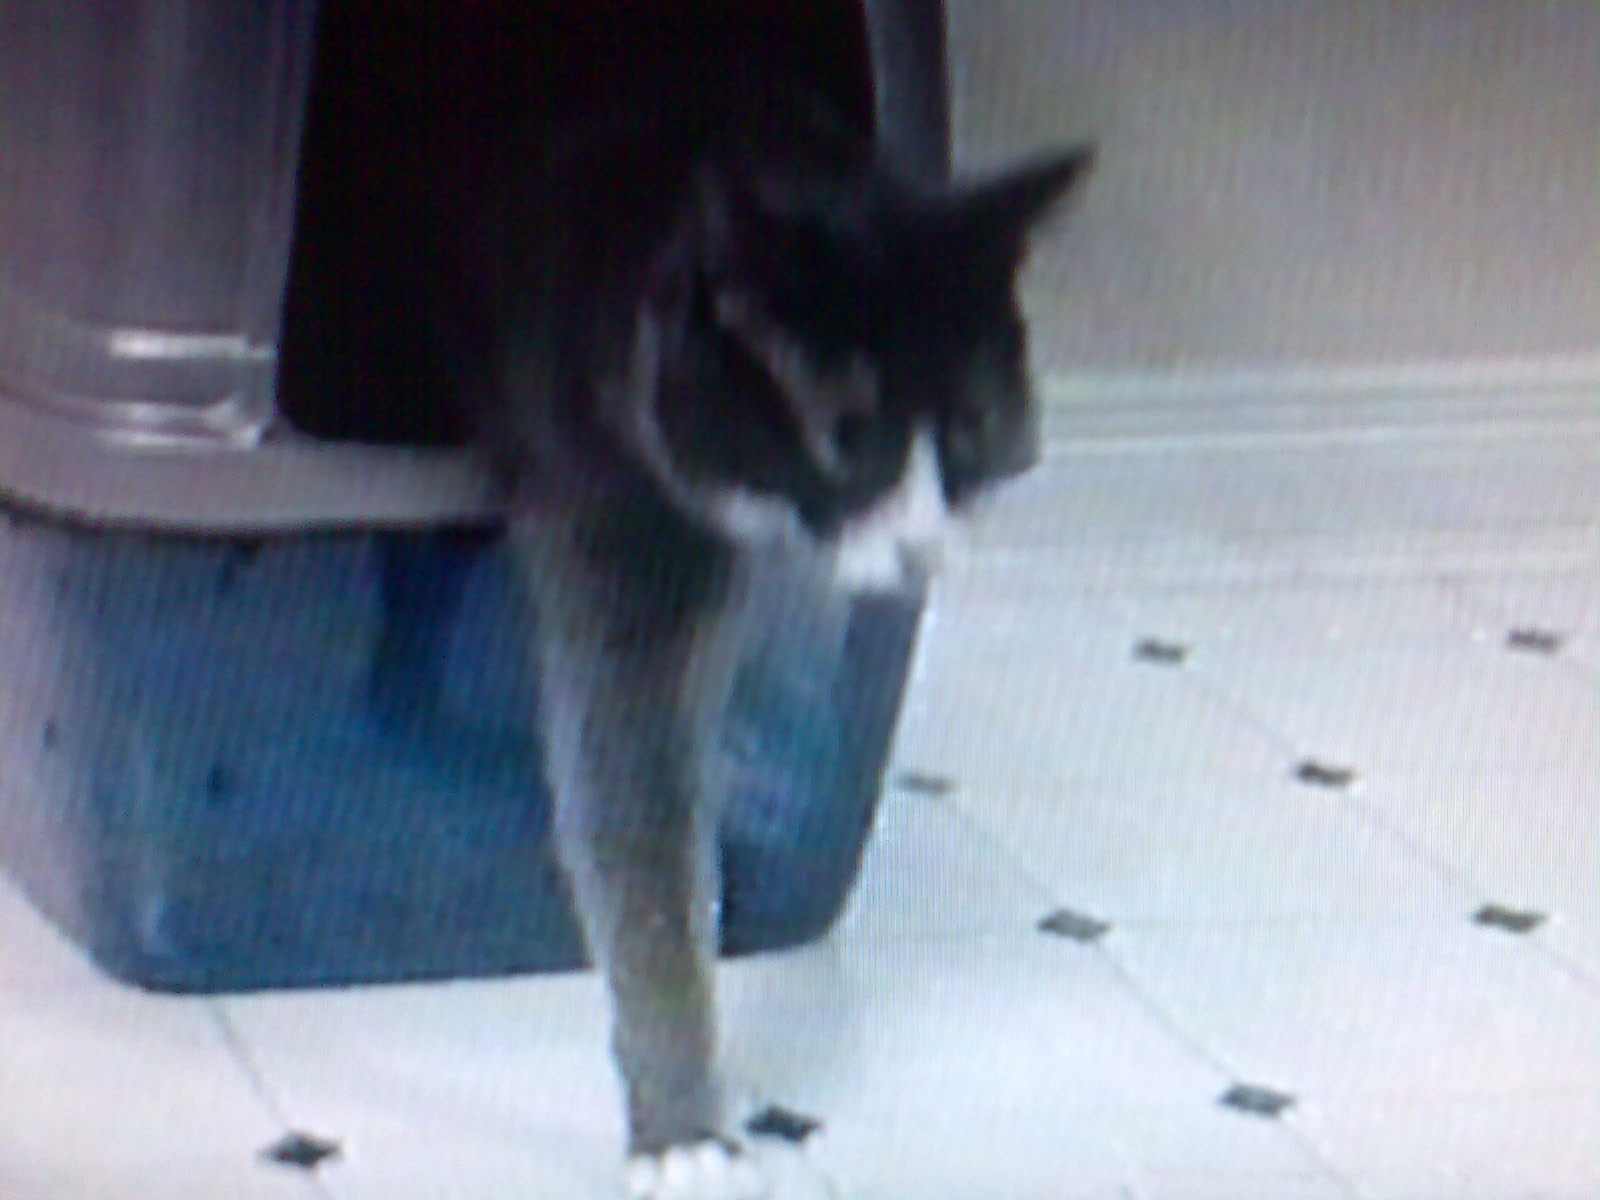 a black and white cat walking across a bathroom floor